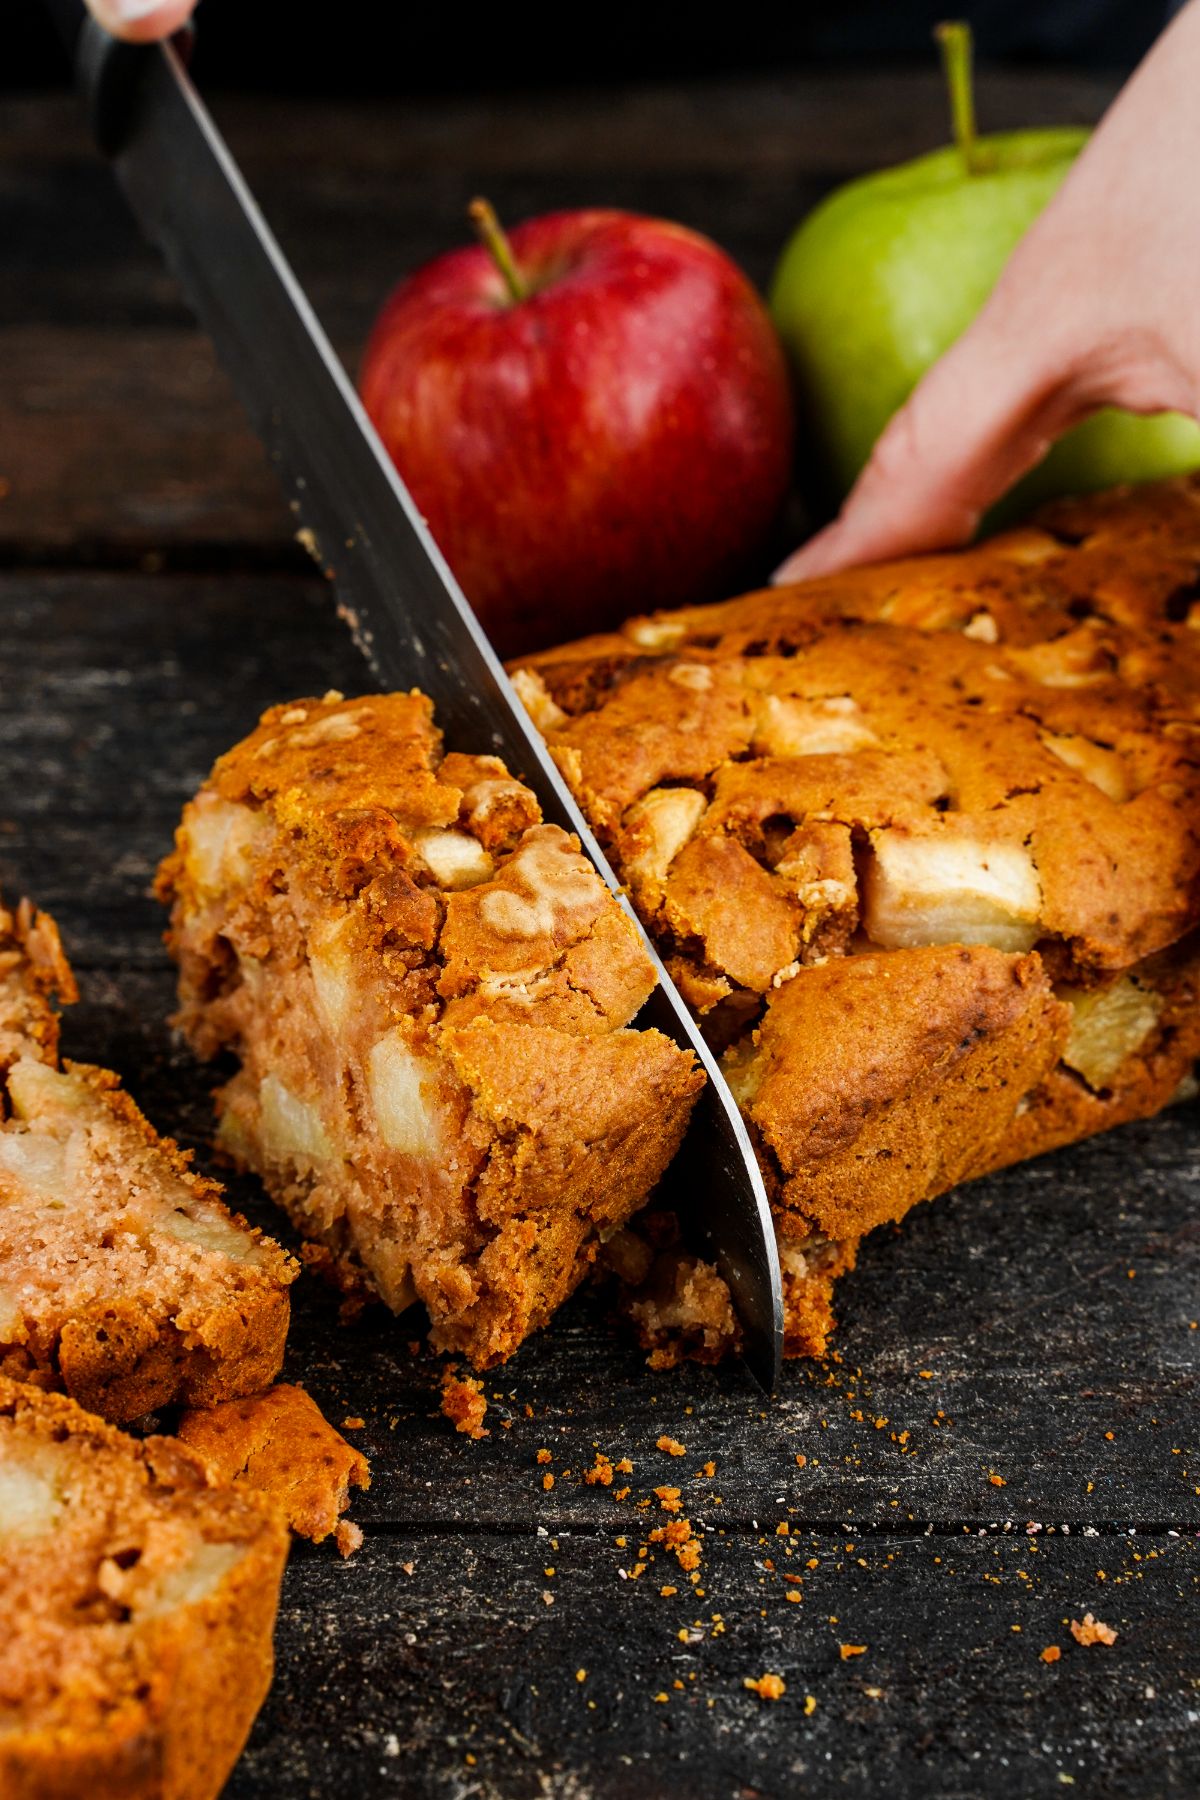 apple bread sitting on black counter by apples being sliced with large knife